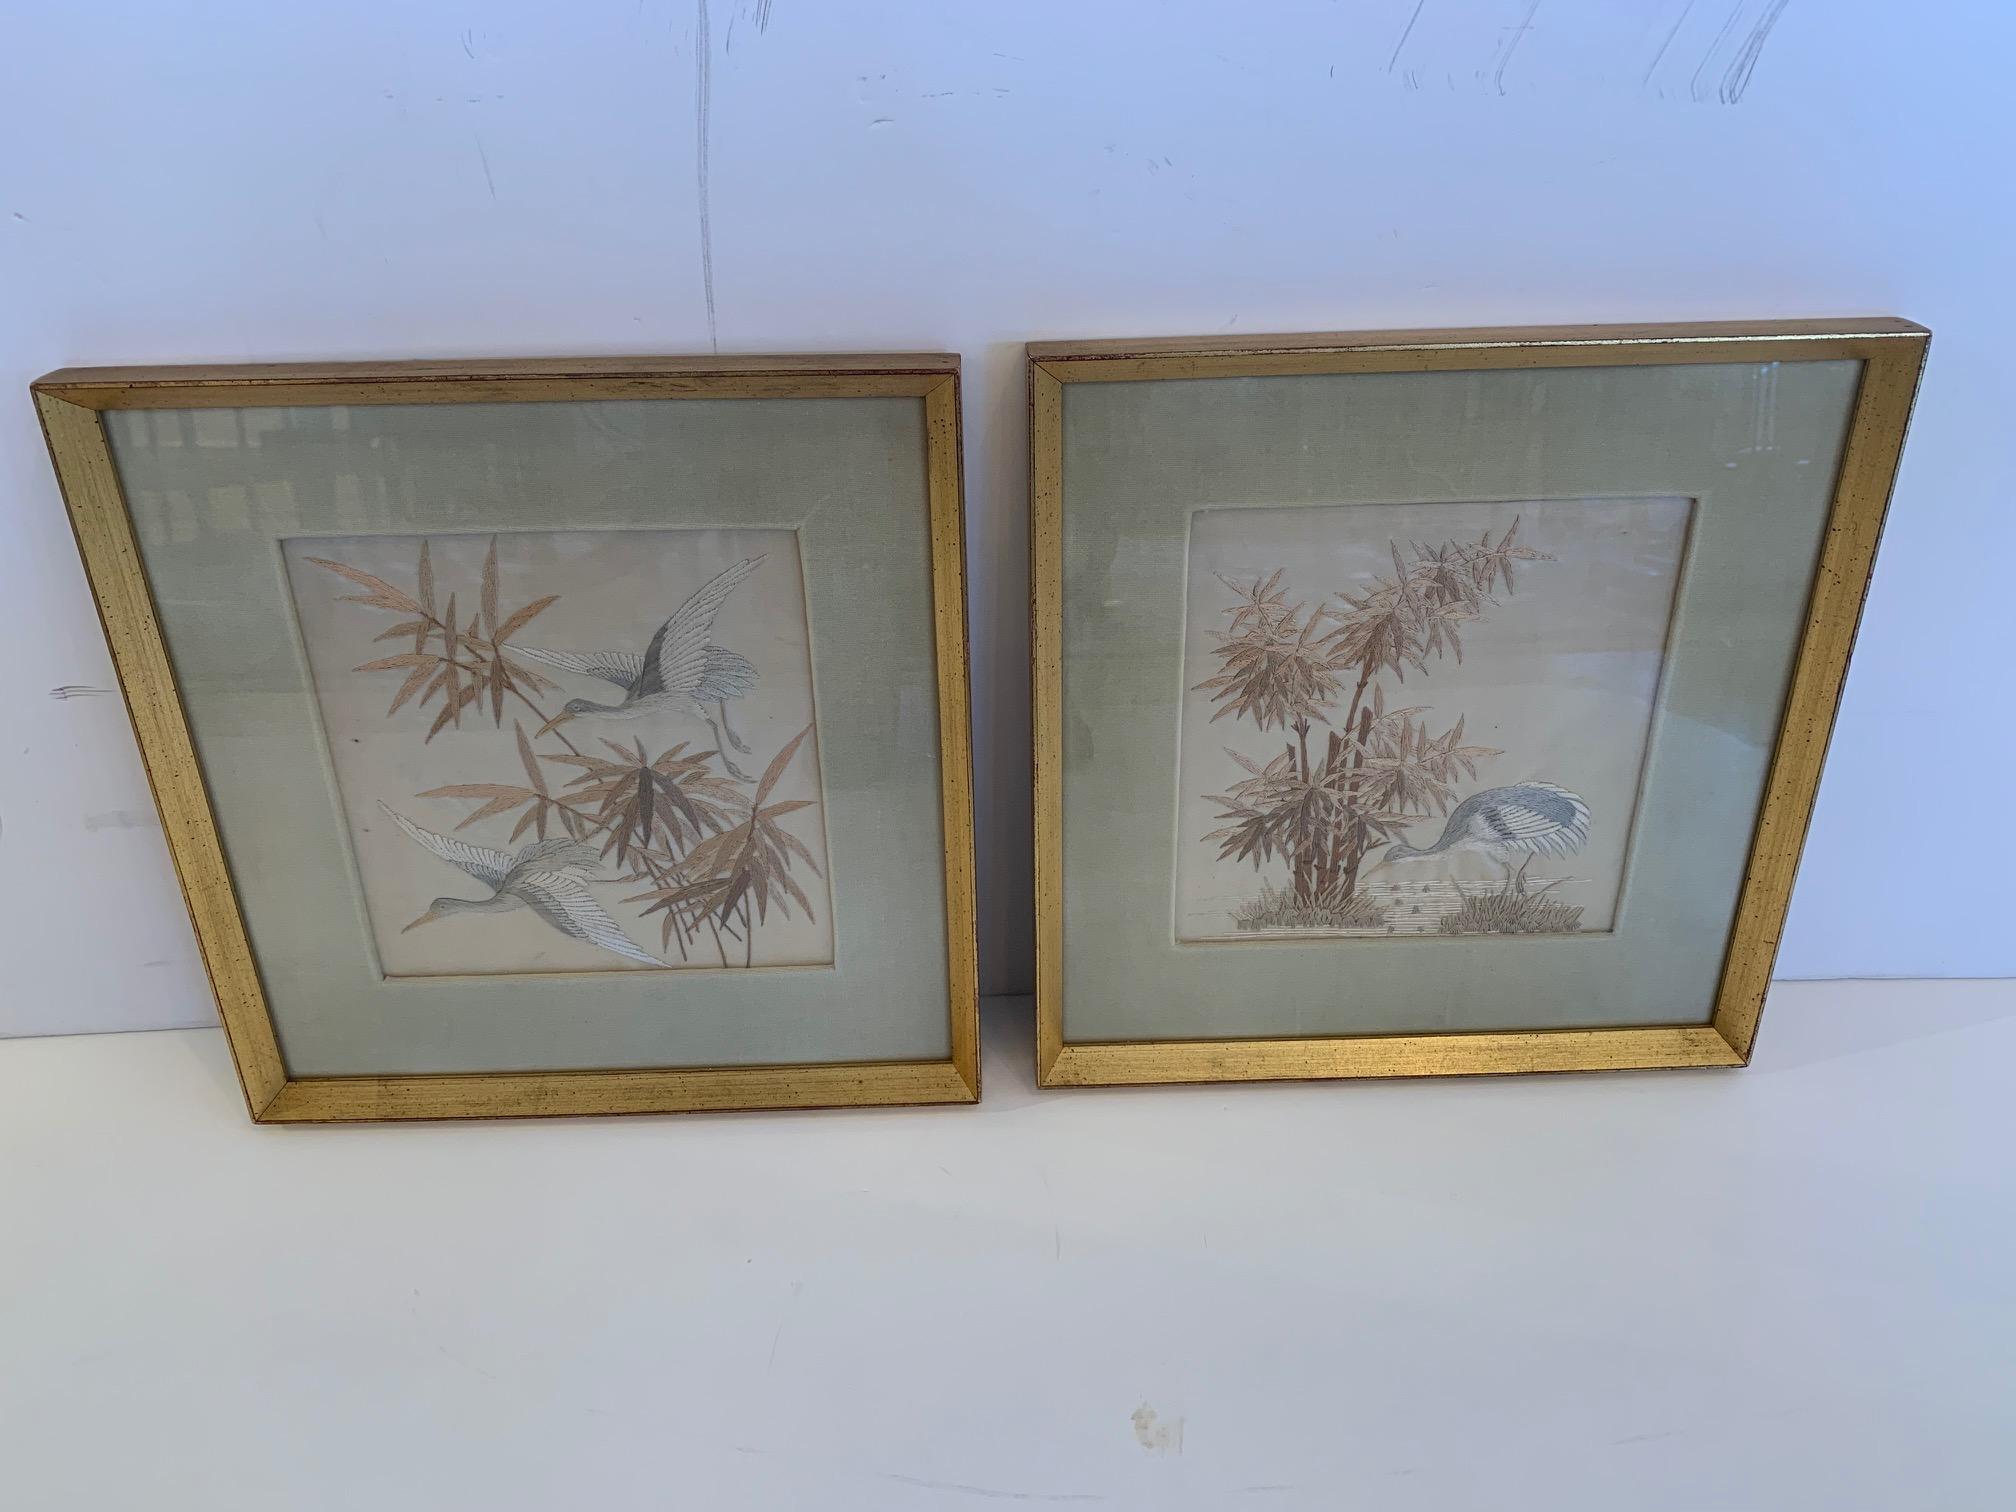 Lovely pair of fine silk needlework of herons and bamboo having subtle color palette of platinum grey, silver, white and champagne. Each is beautifully framed with celadon velvet mats and gilt moldings.